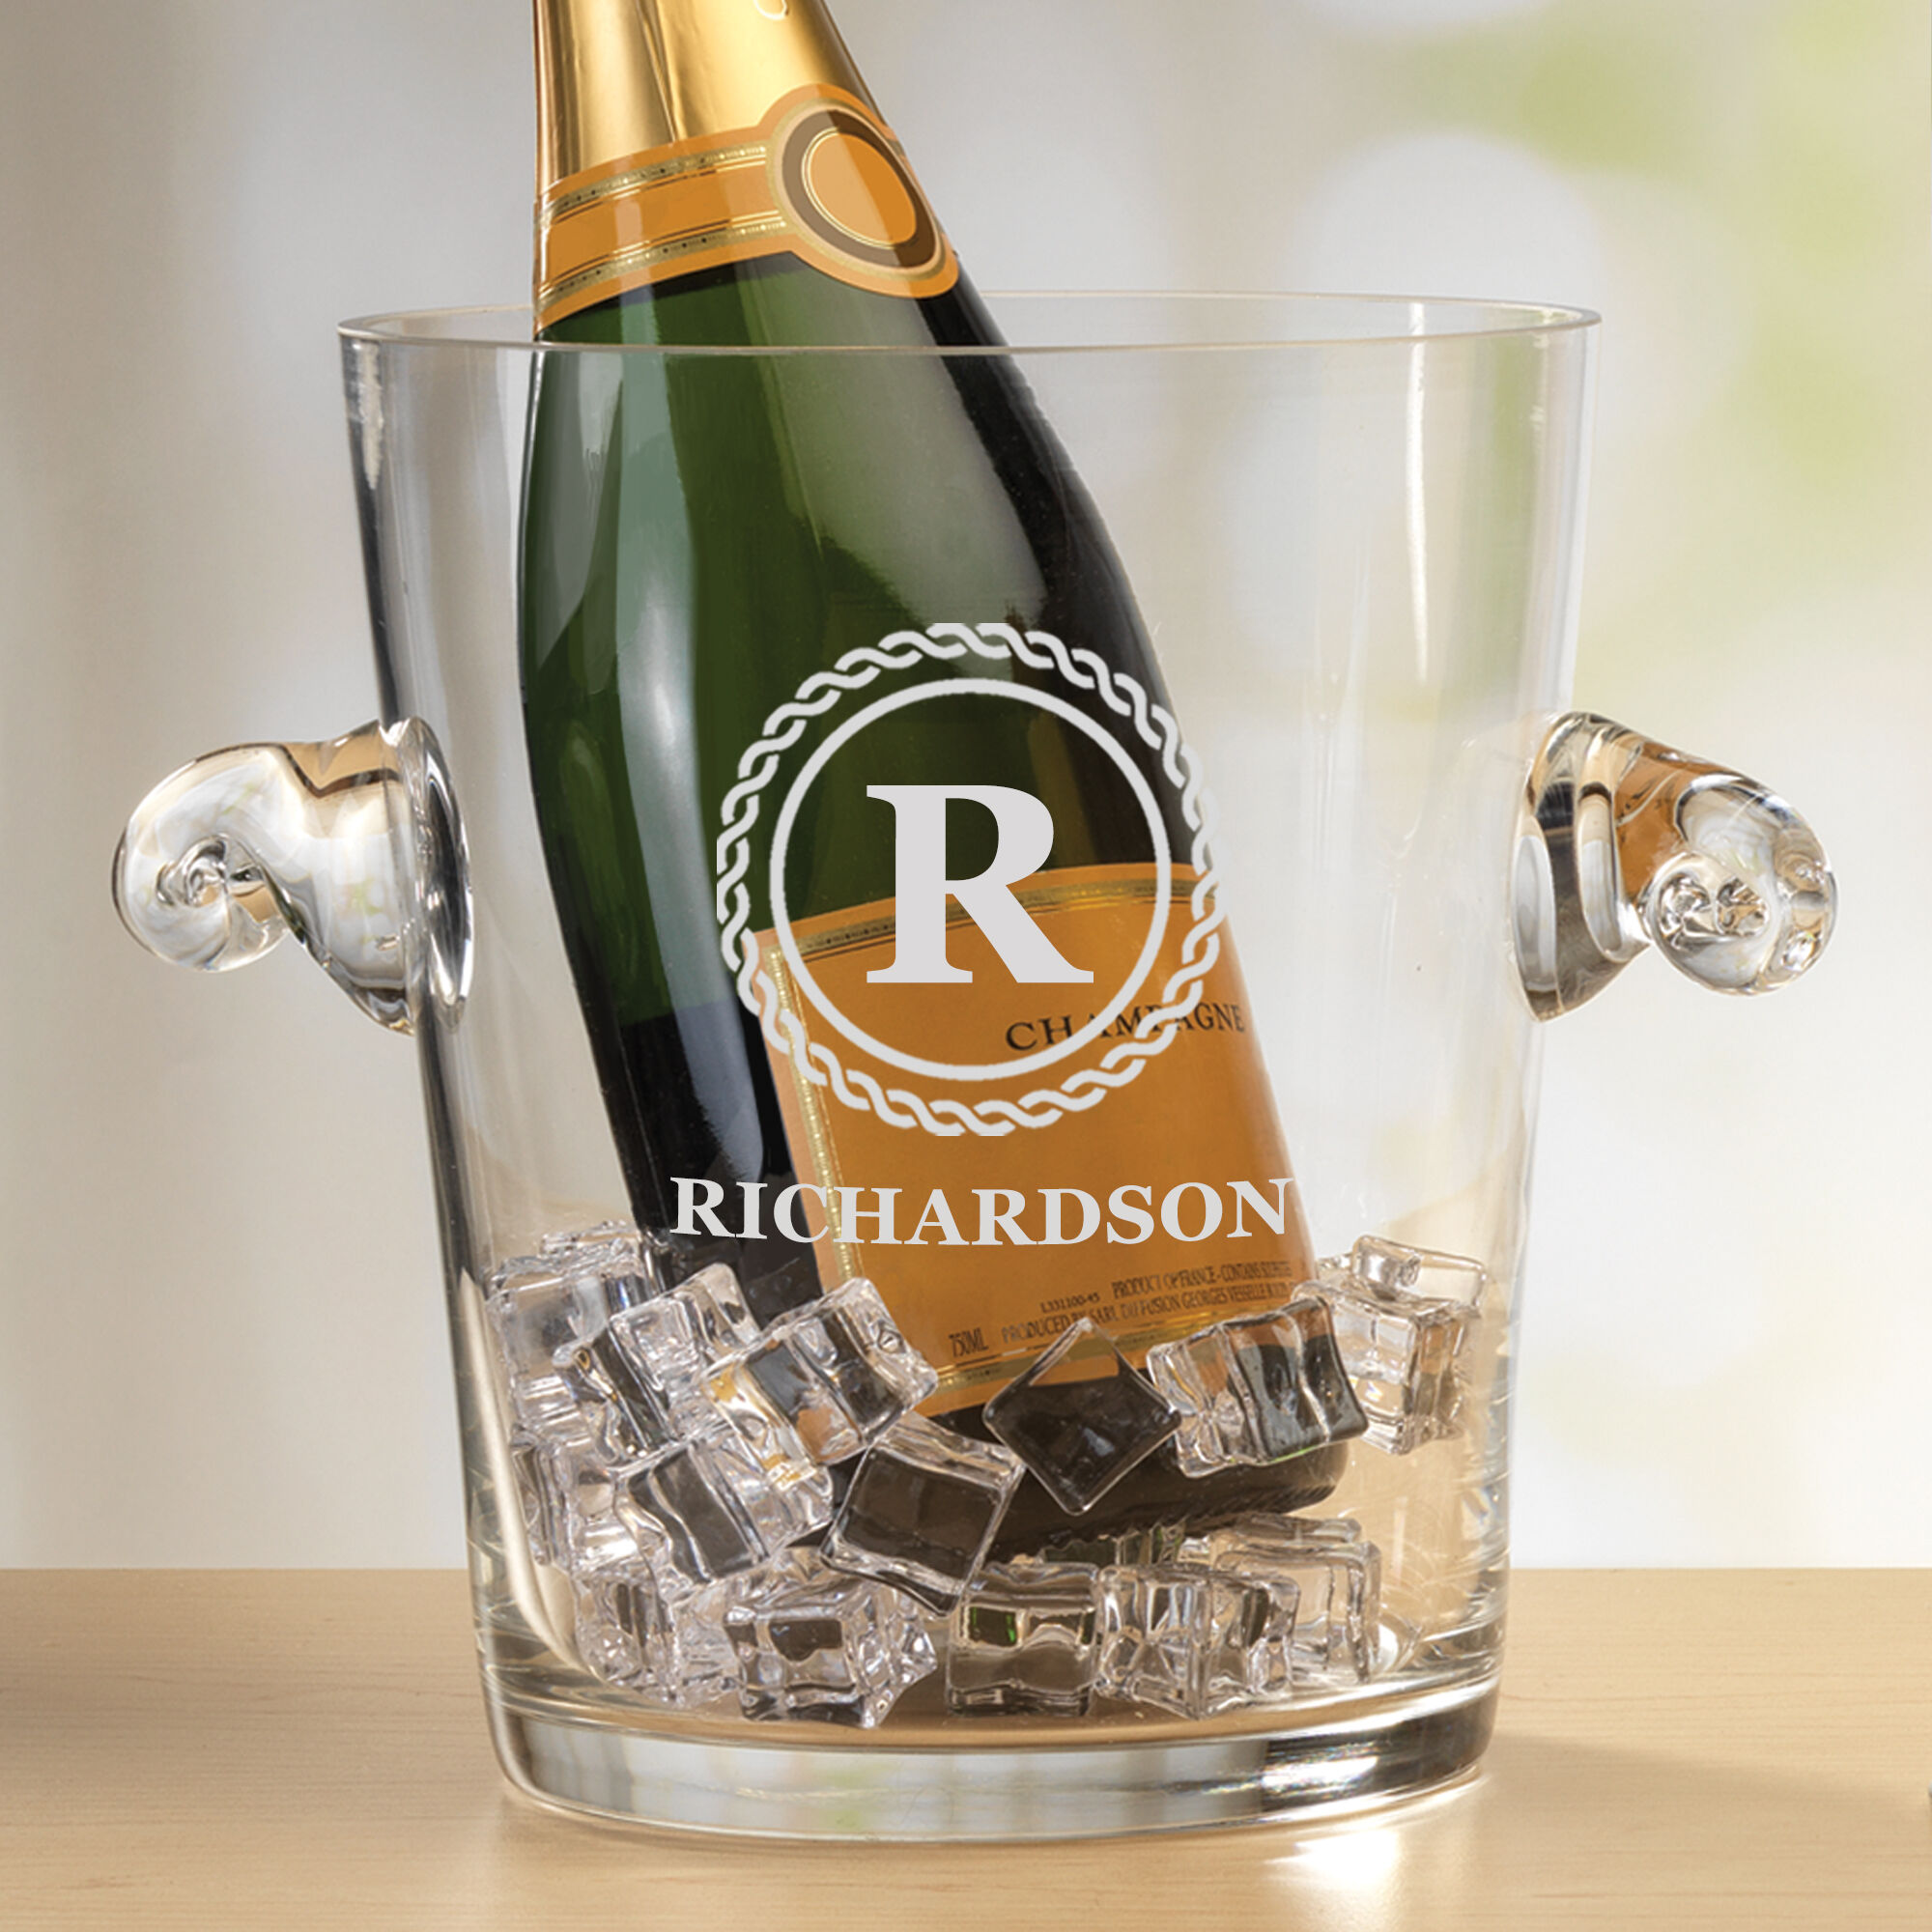 The Personalized Champagne Bucket 10036 0056 b bucket